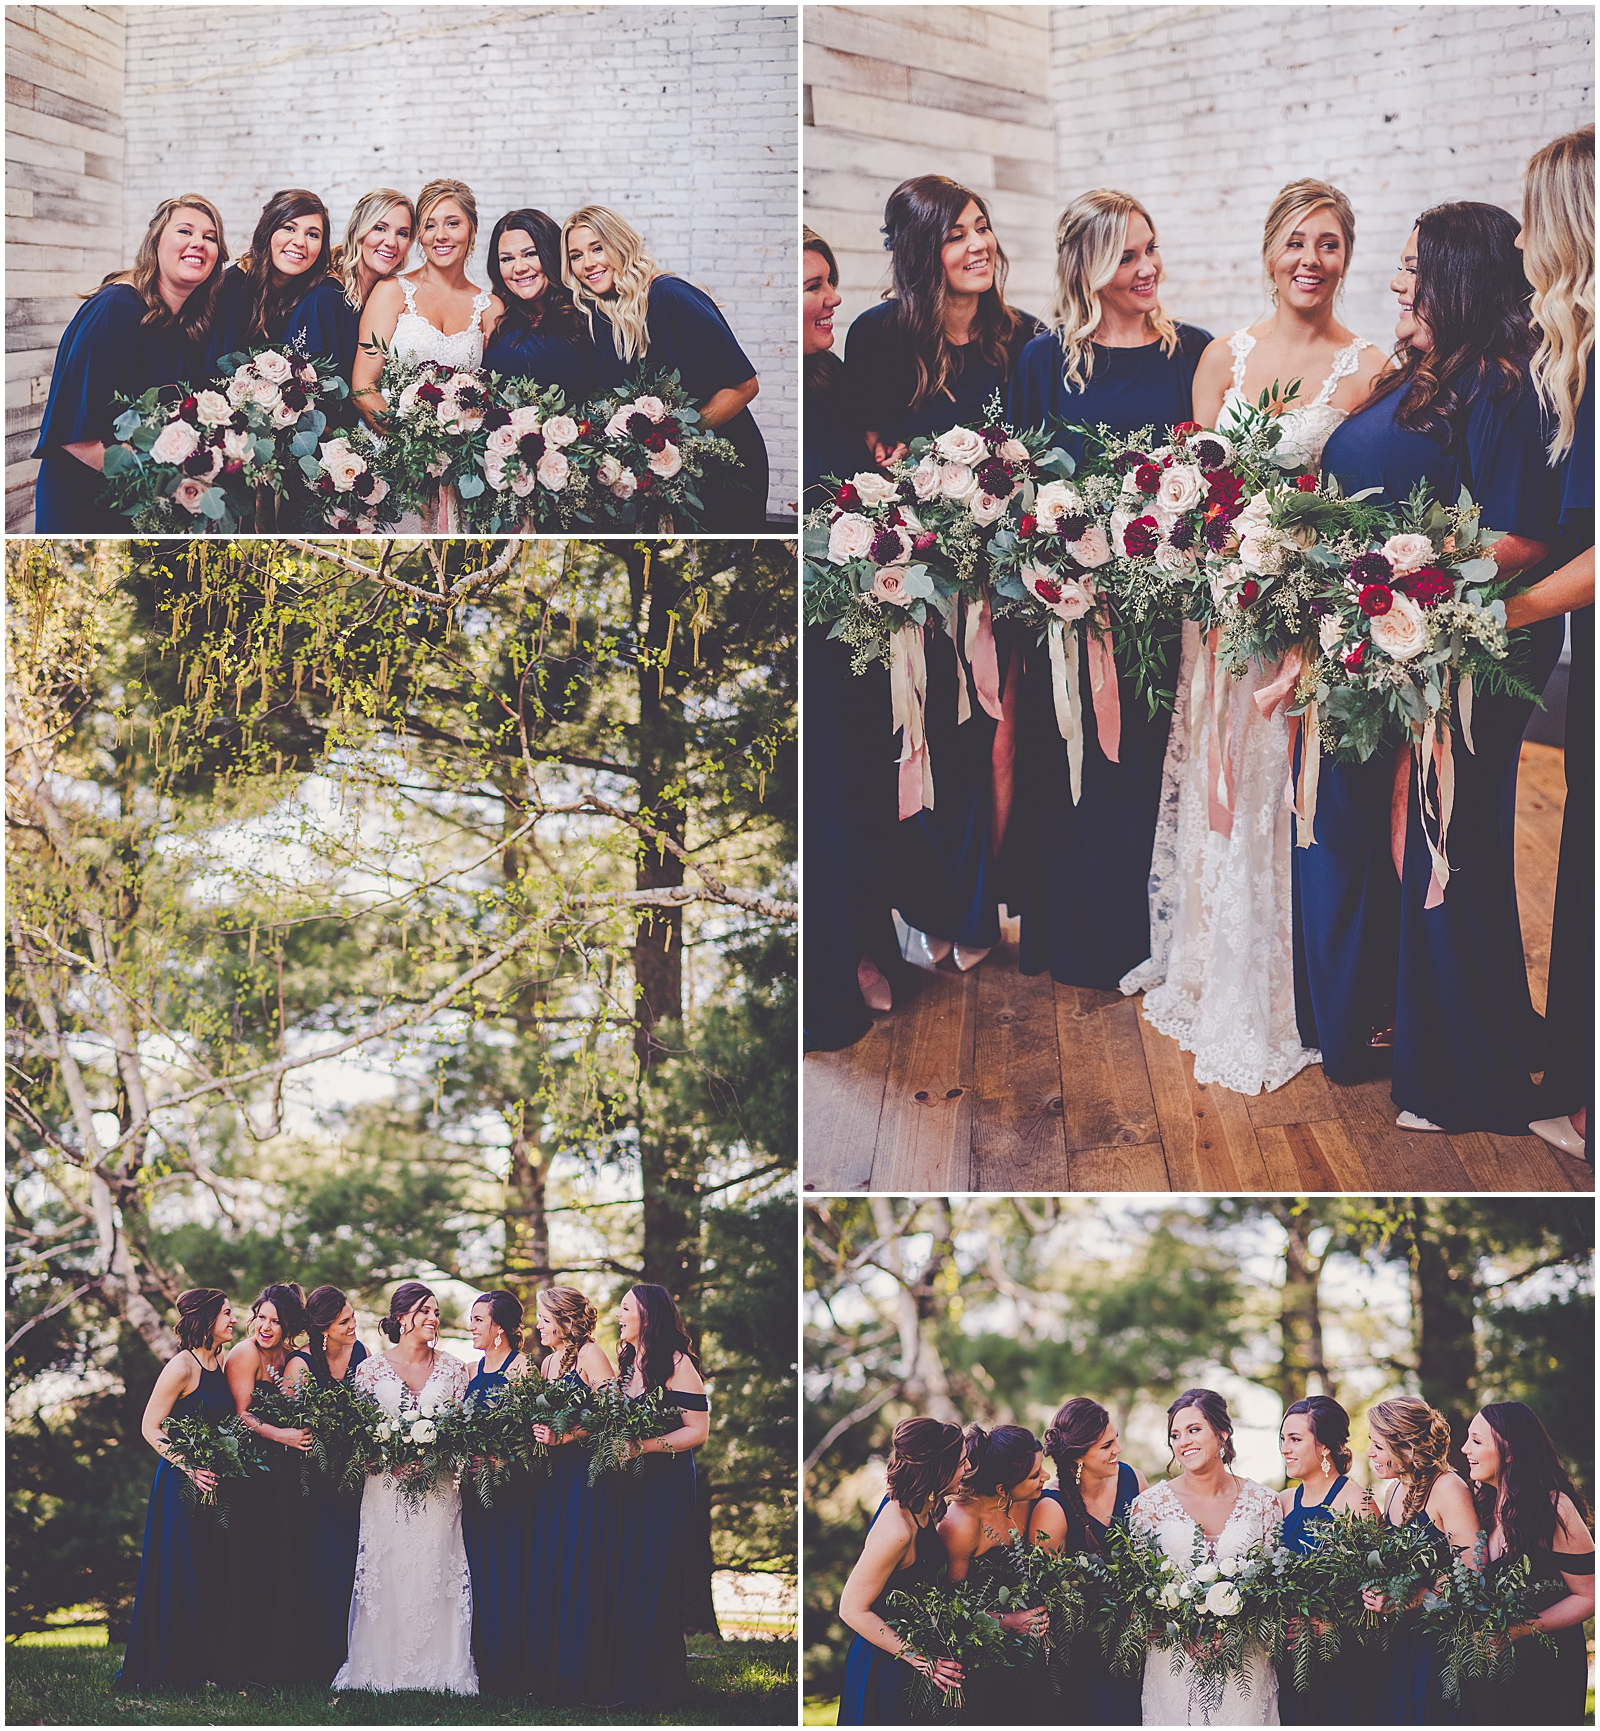 The Pantone color of the year 2020 - classic blue - Chicagoland wedding photographer Kara Evans Photographer's take on the 2020 Pantone of the year.